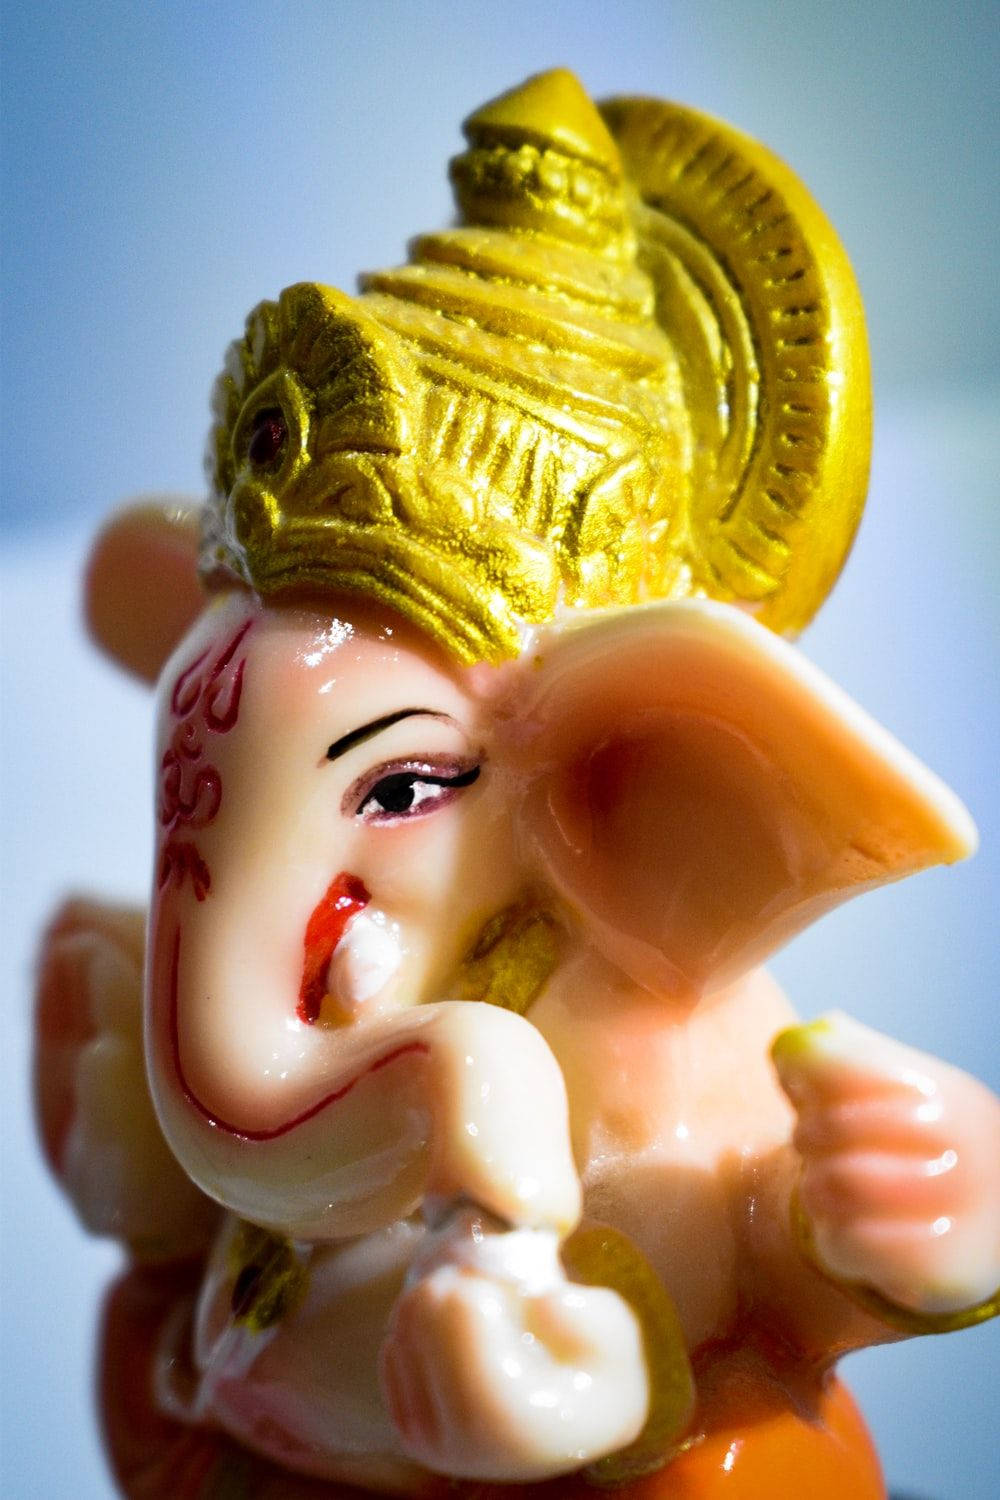 Ganpatihd Figurine (in The Context Of Computer/mobile Wallpaper) Would Be Translated To Ganpati Hd Figurine In German, As The Words Ganpati, Hd, And Figurine Are Commonly Used In German As Well. However, It's Worth Noting That The Word 